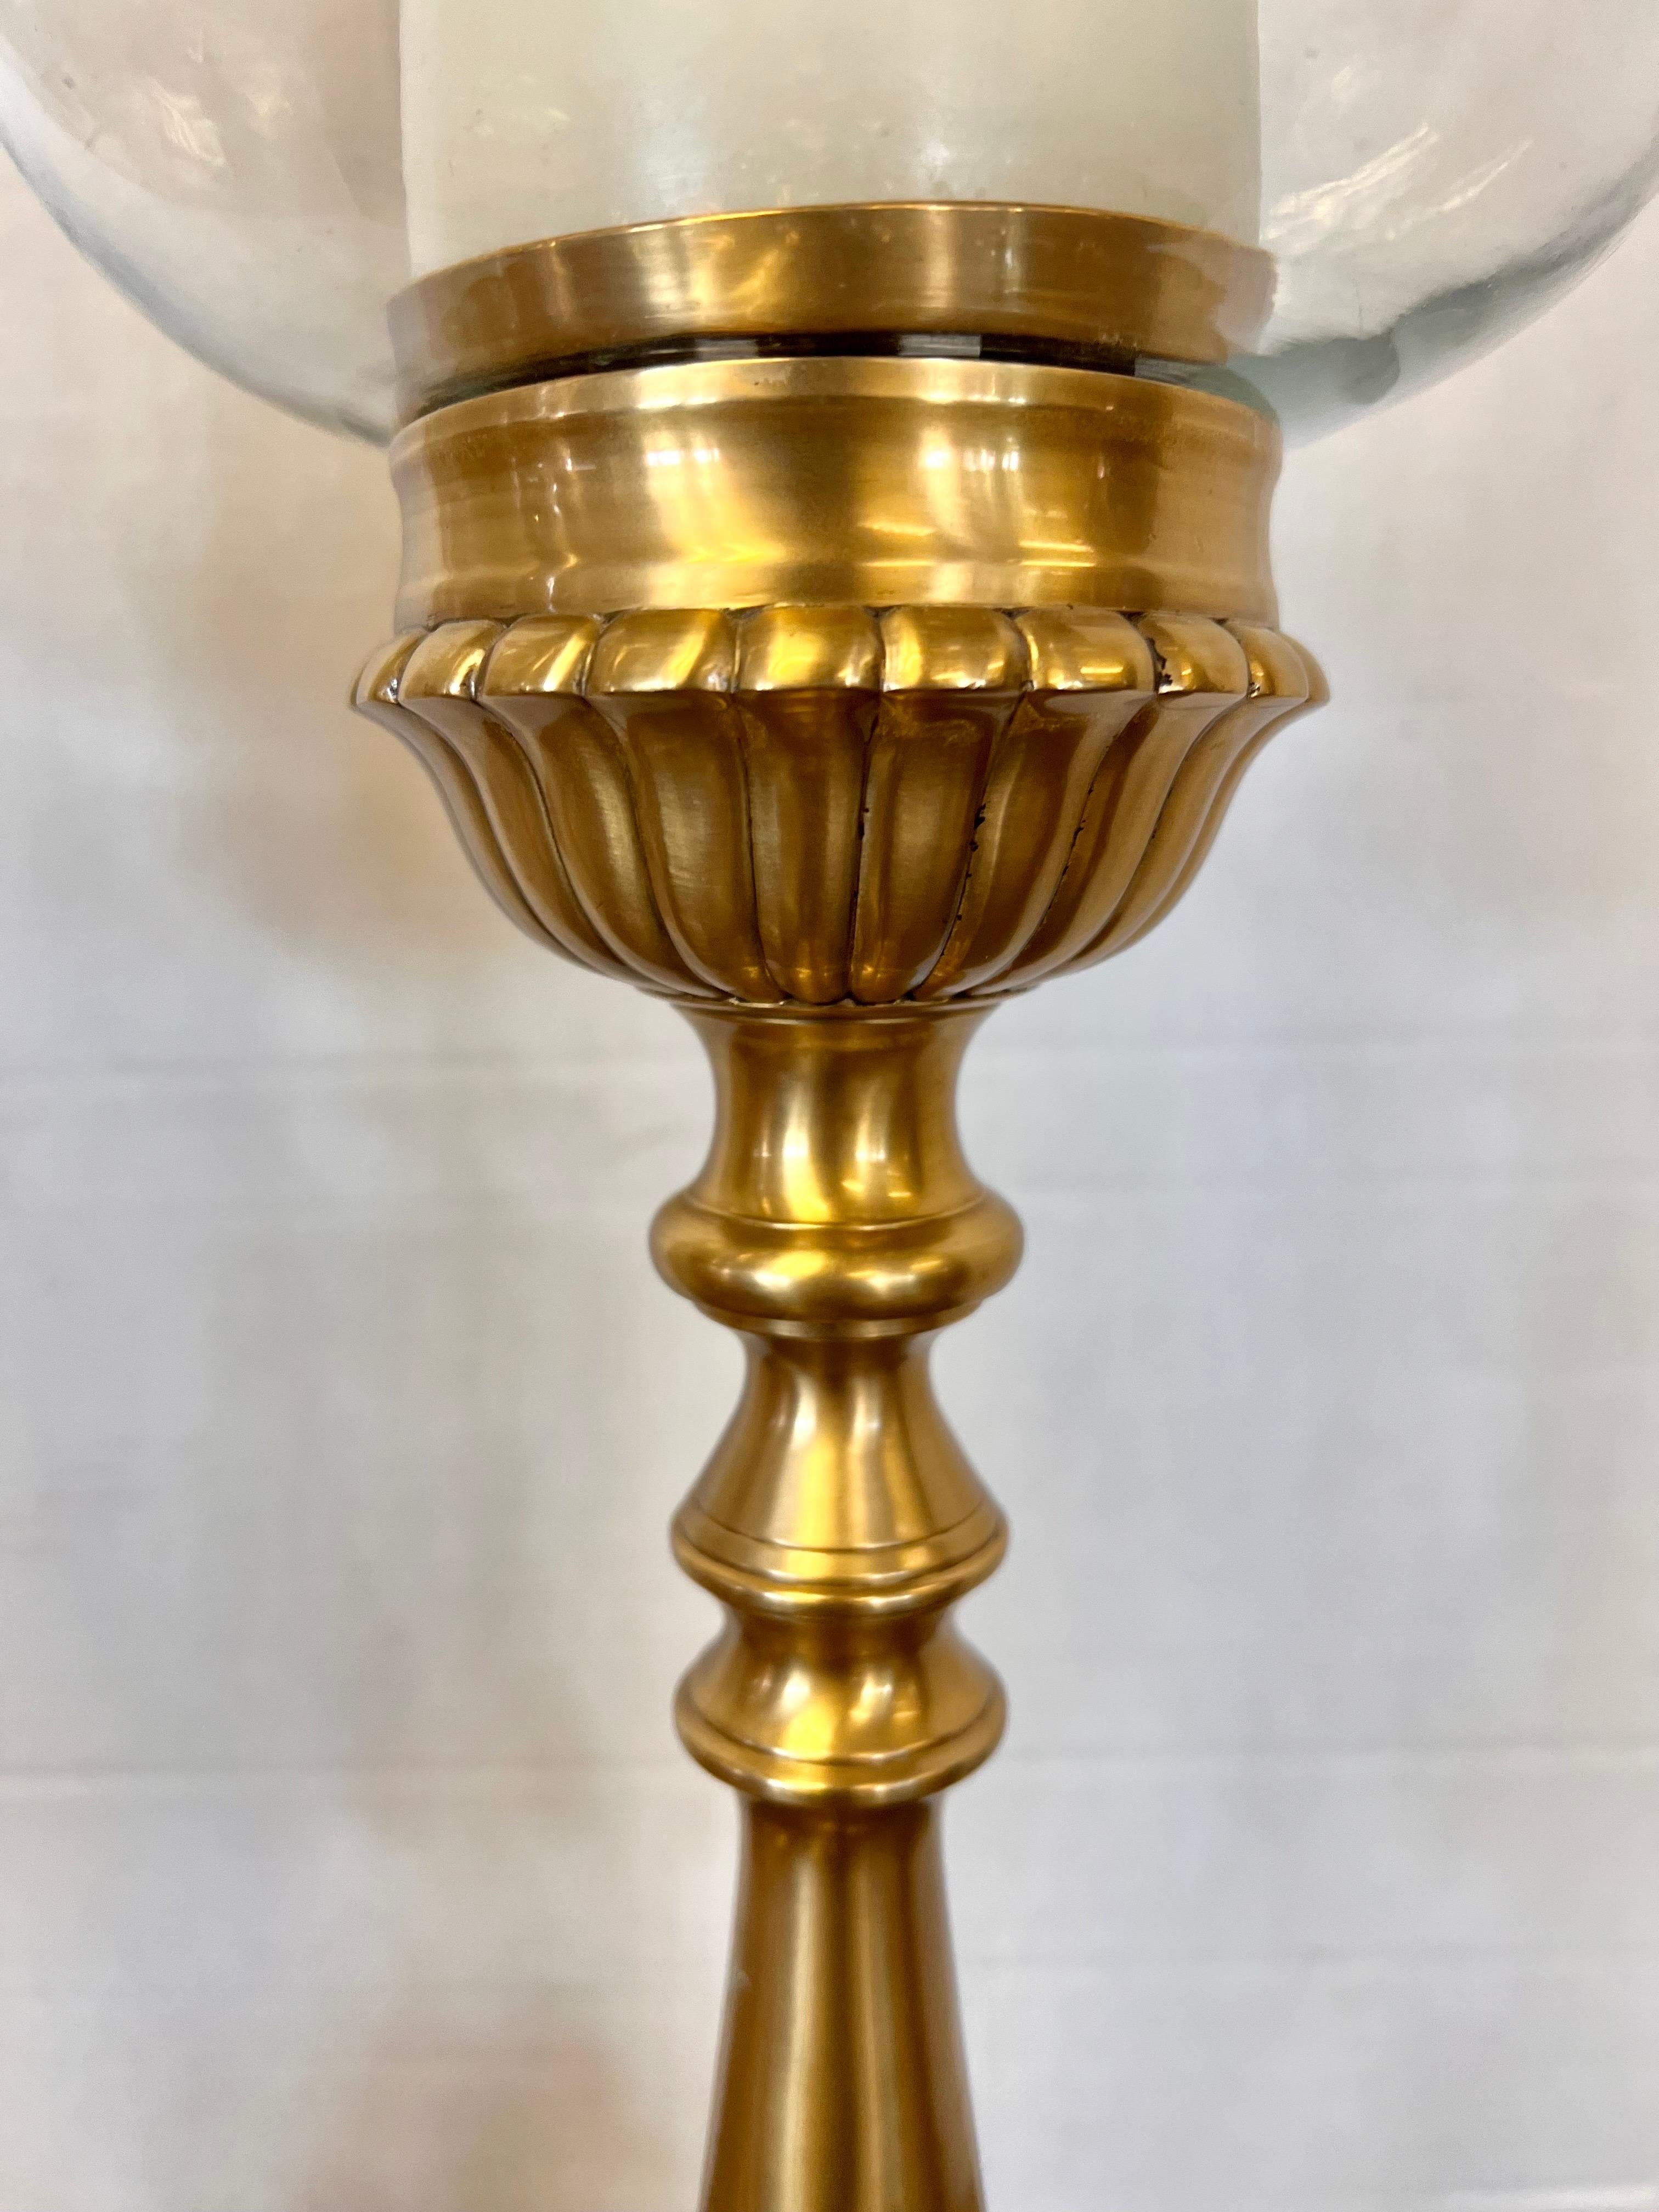 20th Century Pair of Tall Brass Candle Holders with Glass Hurricanes